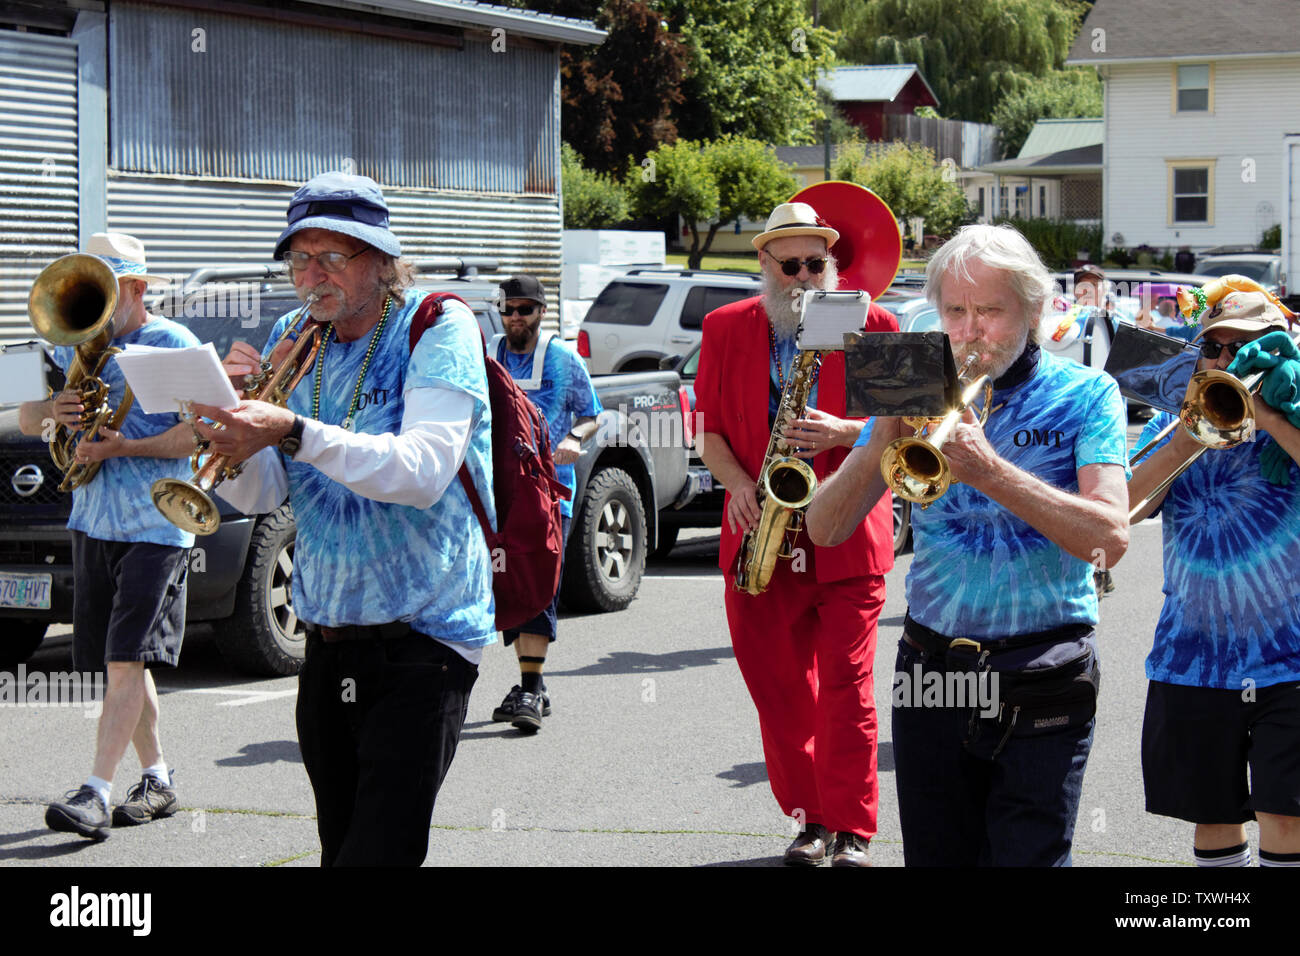 The One More Time marching band performs during the Brownsville, Oregon parade. Stock Photo